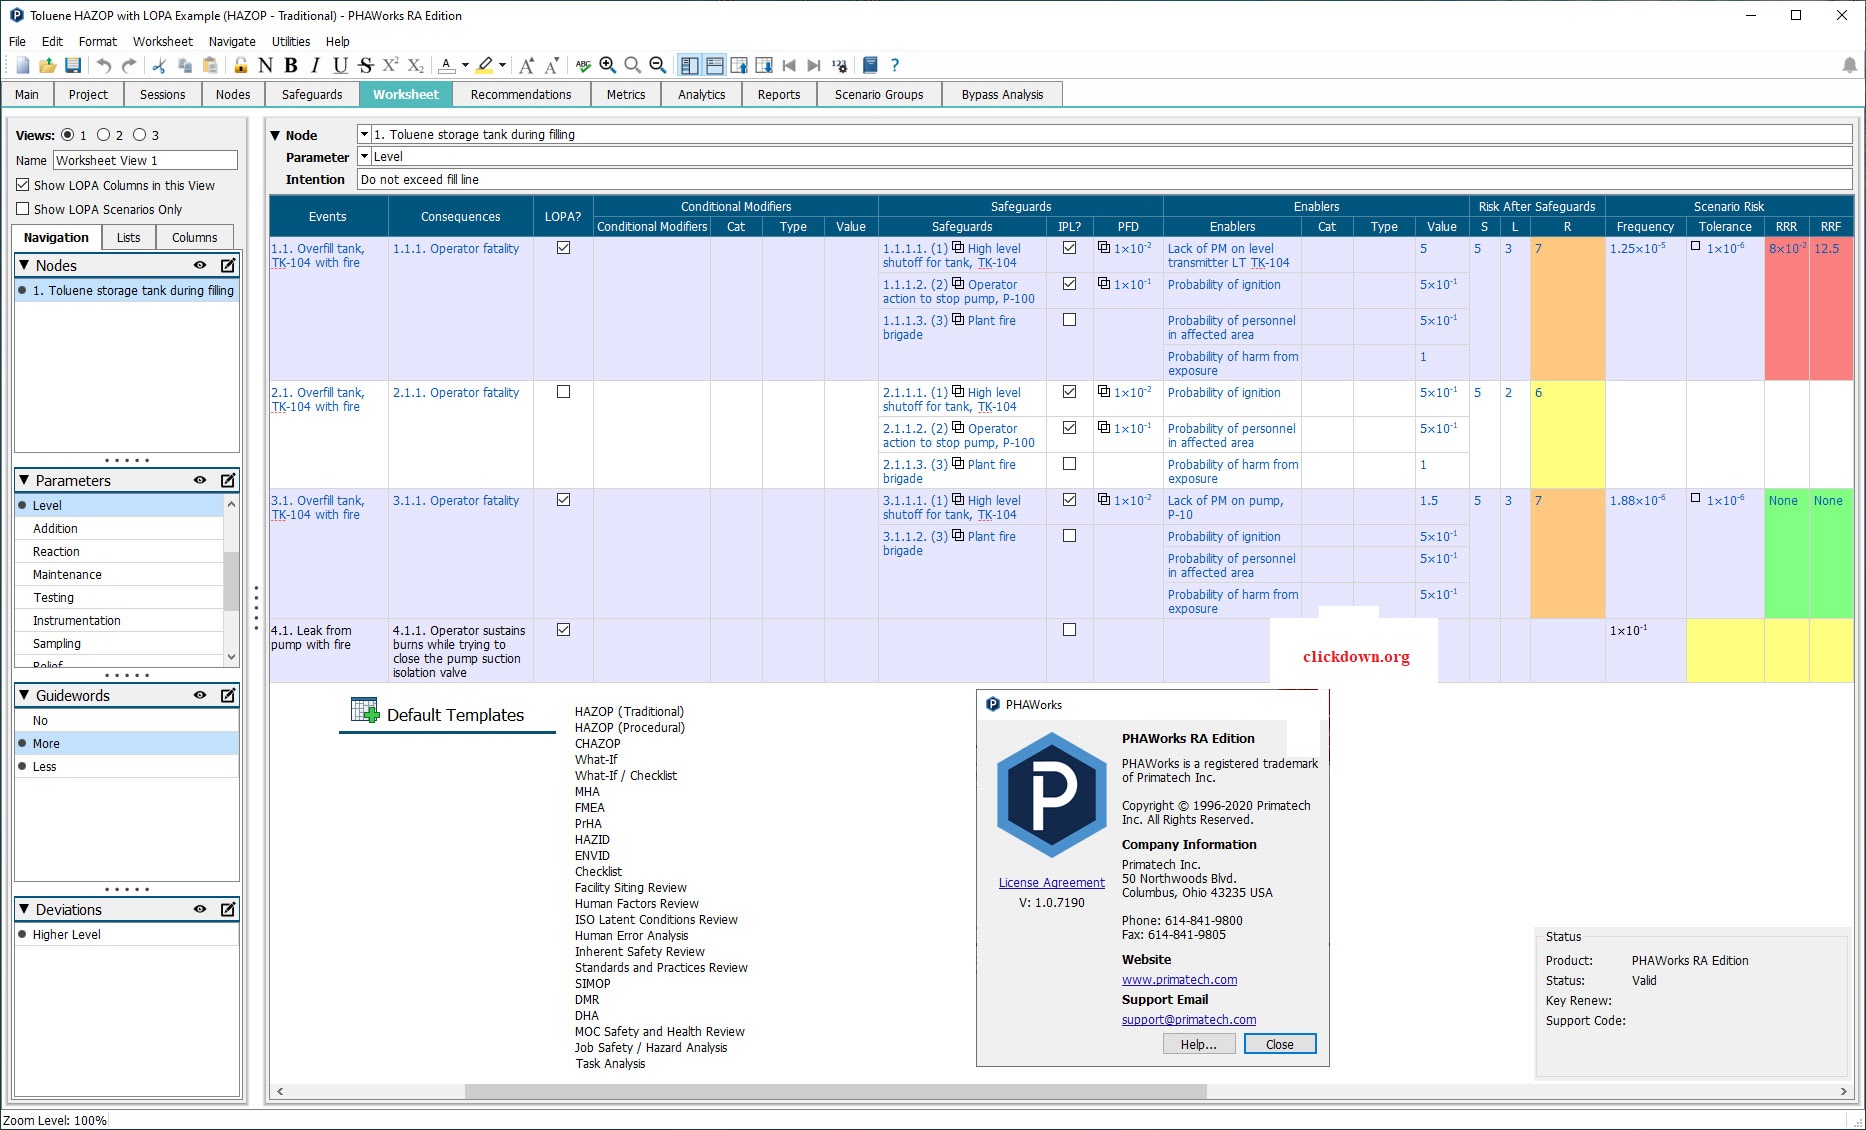 Working with Primatech PHAWorks RA Edition v1.0.7190 full